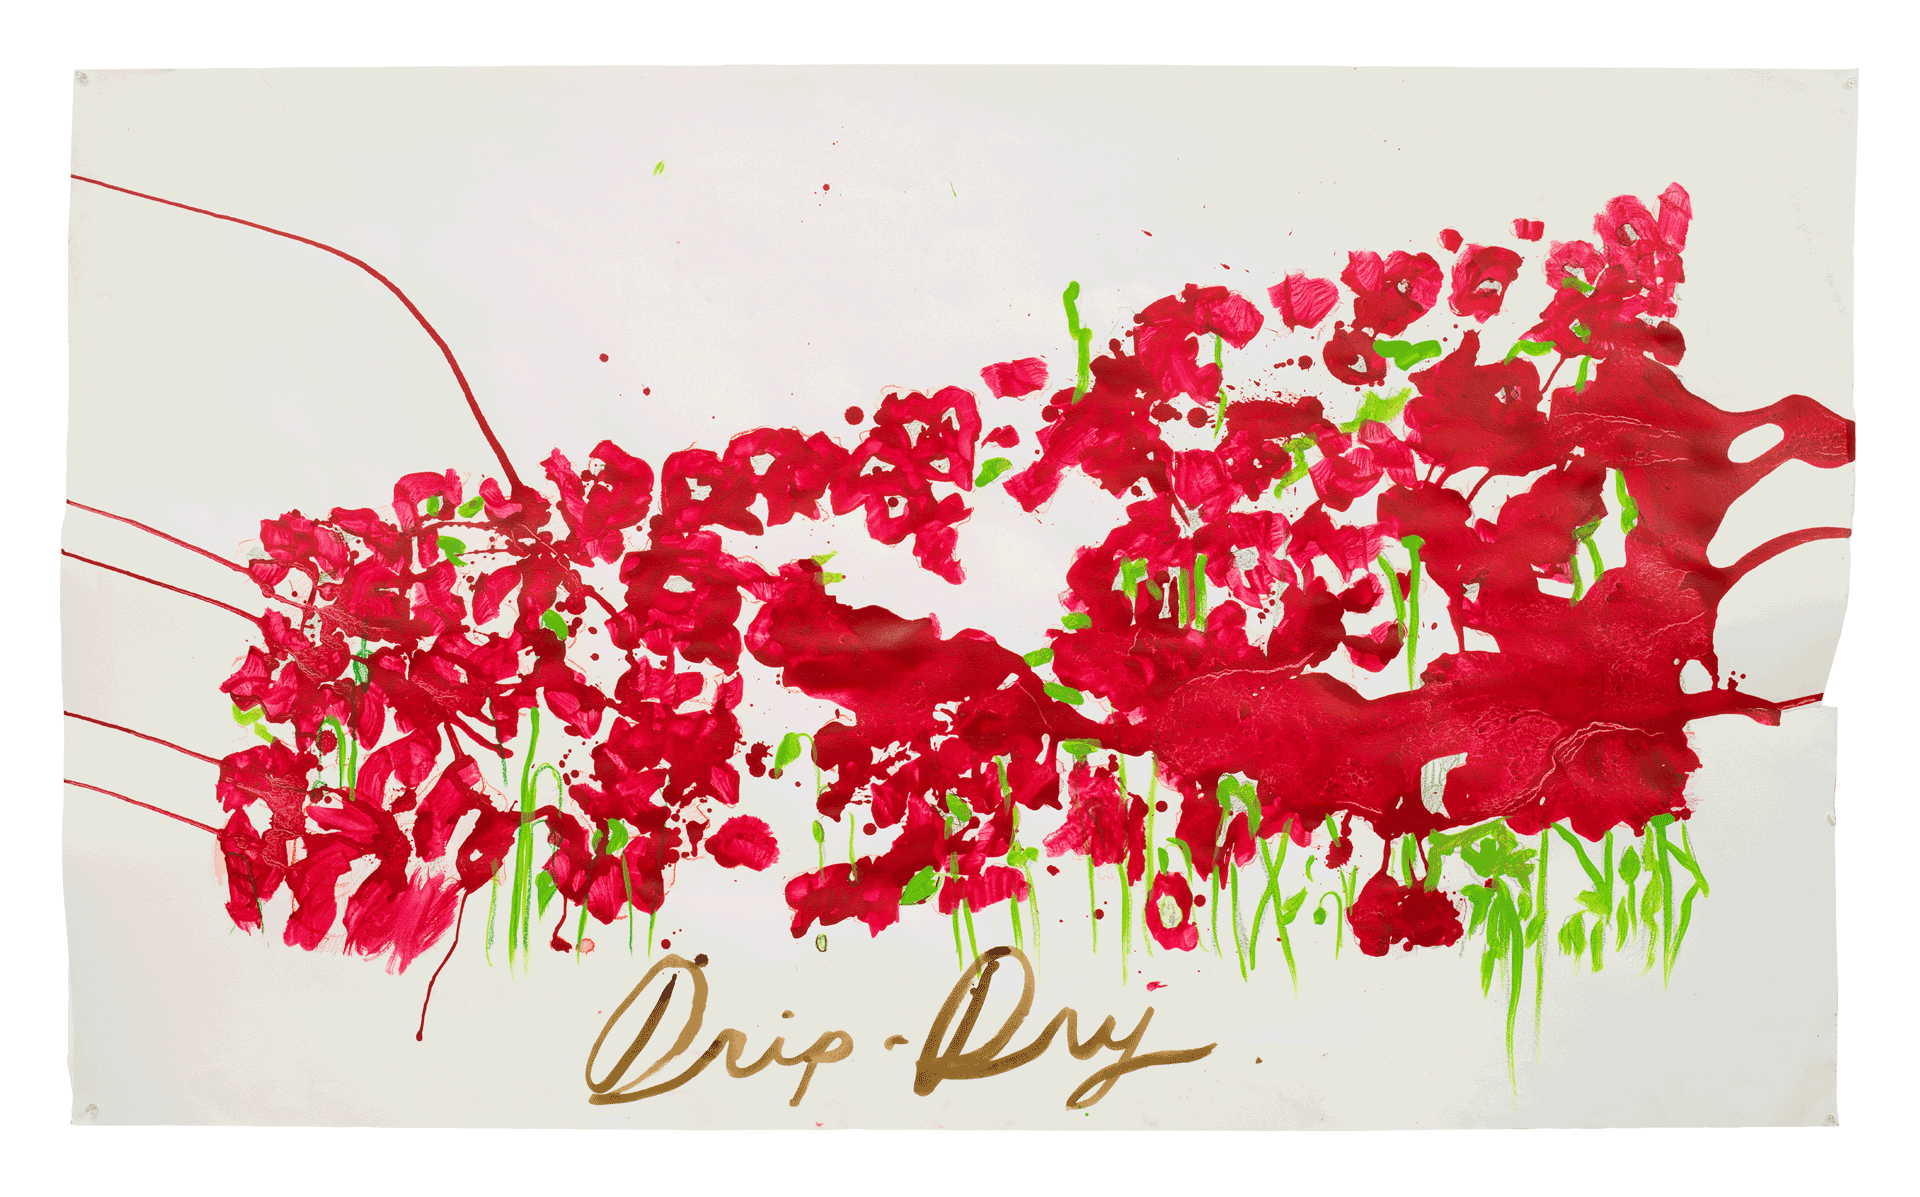 A work on paper by Raymond Pettibon titled No Title (Drip-dry) dated 2018